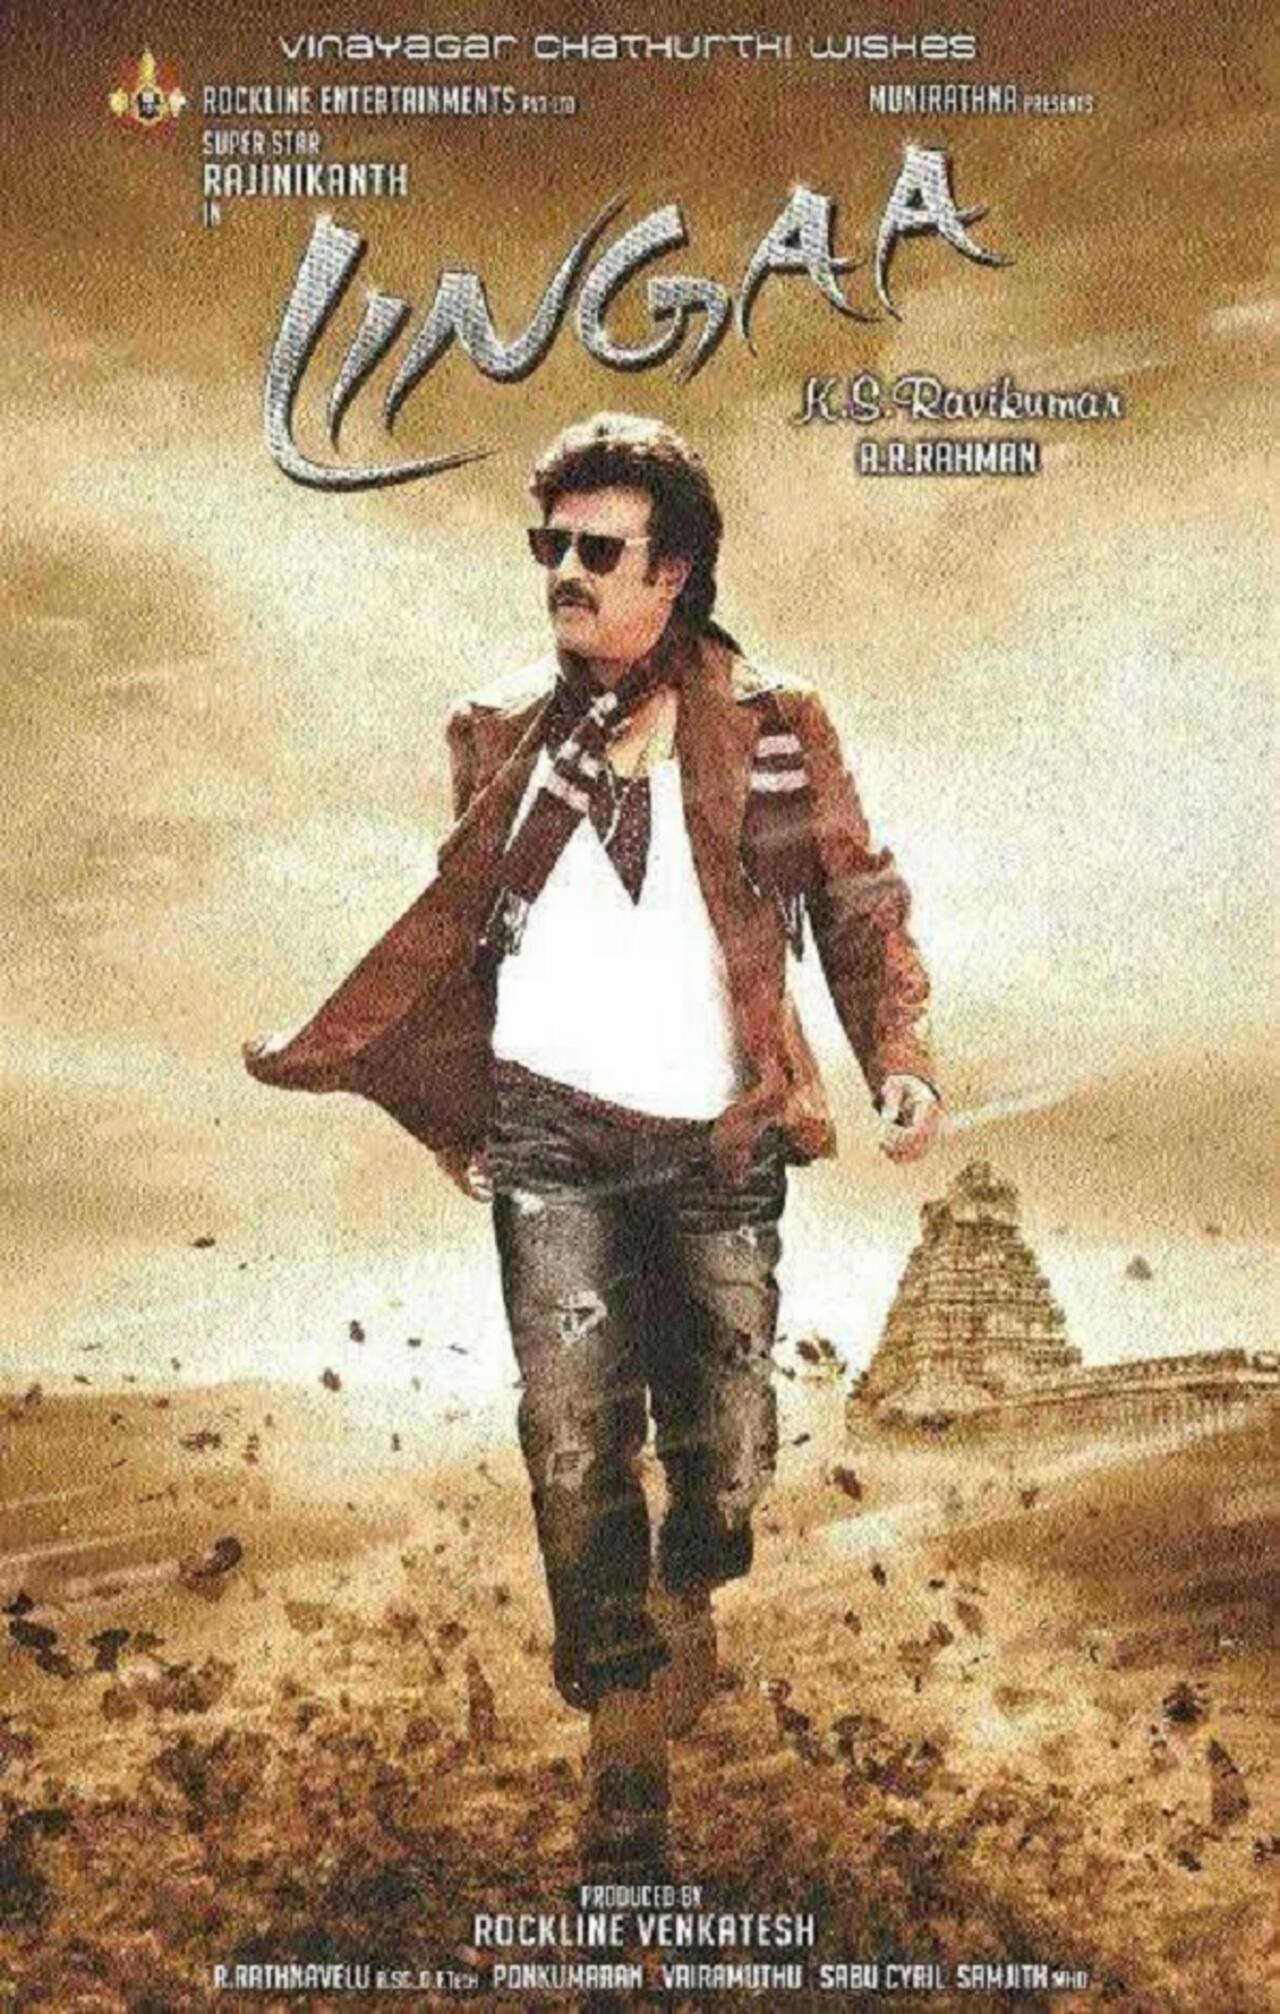 What makes Rajinikanth's Lingaa a special film?